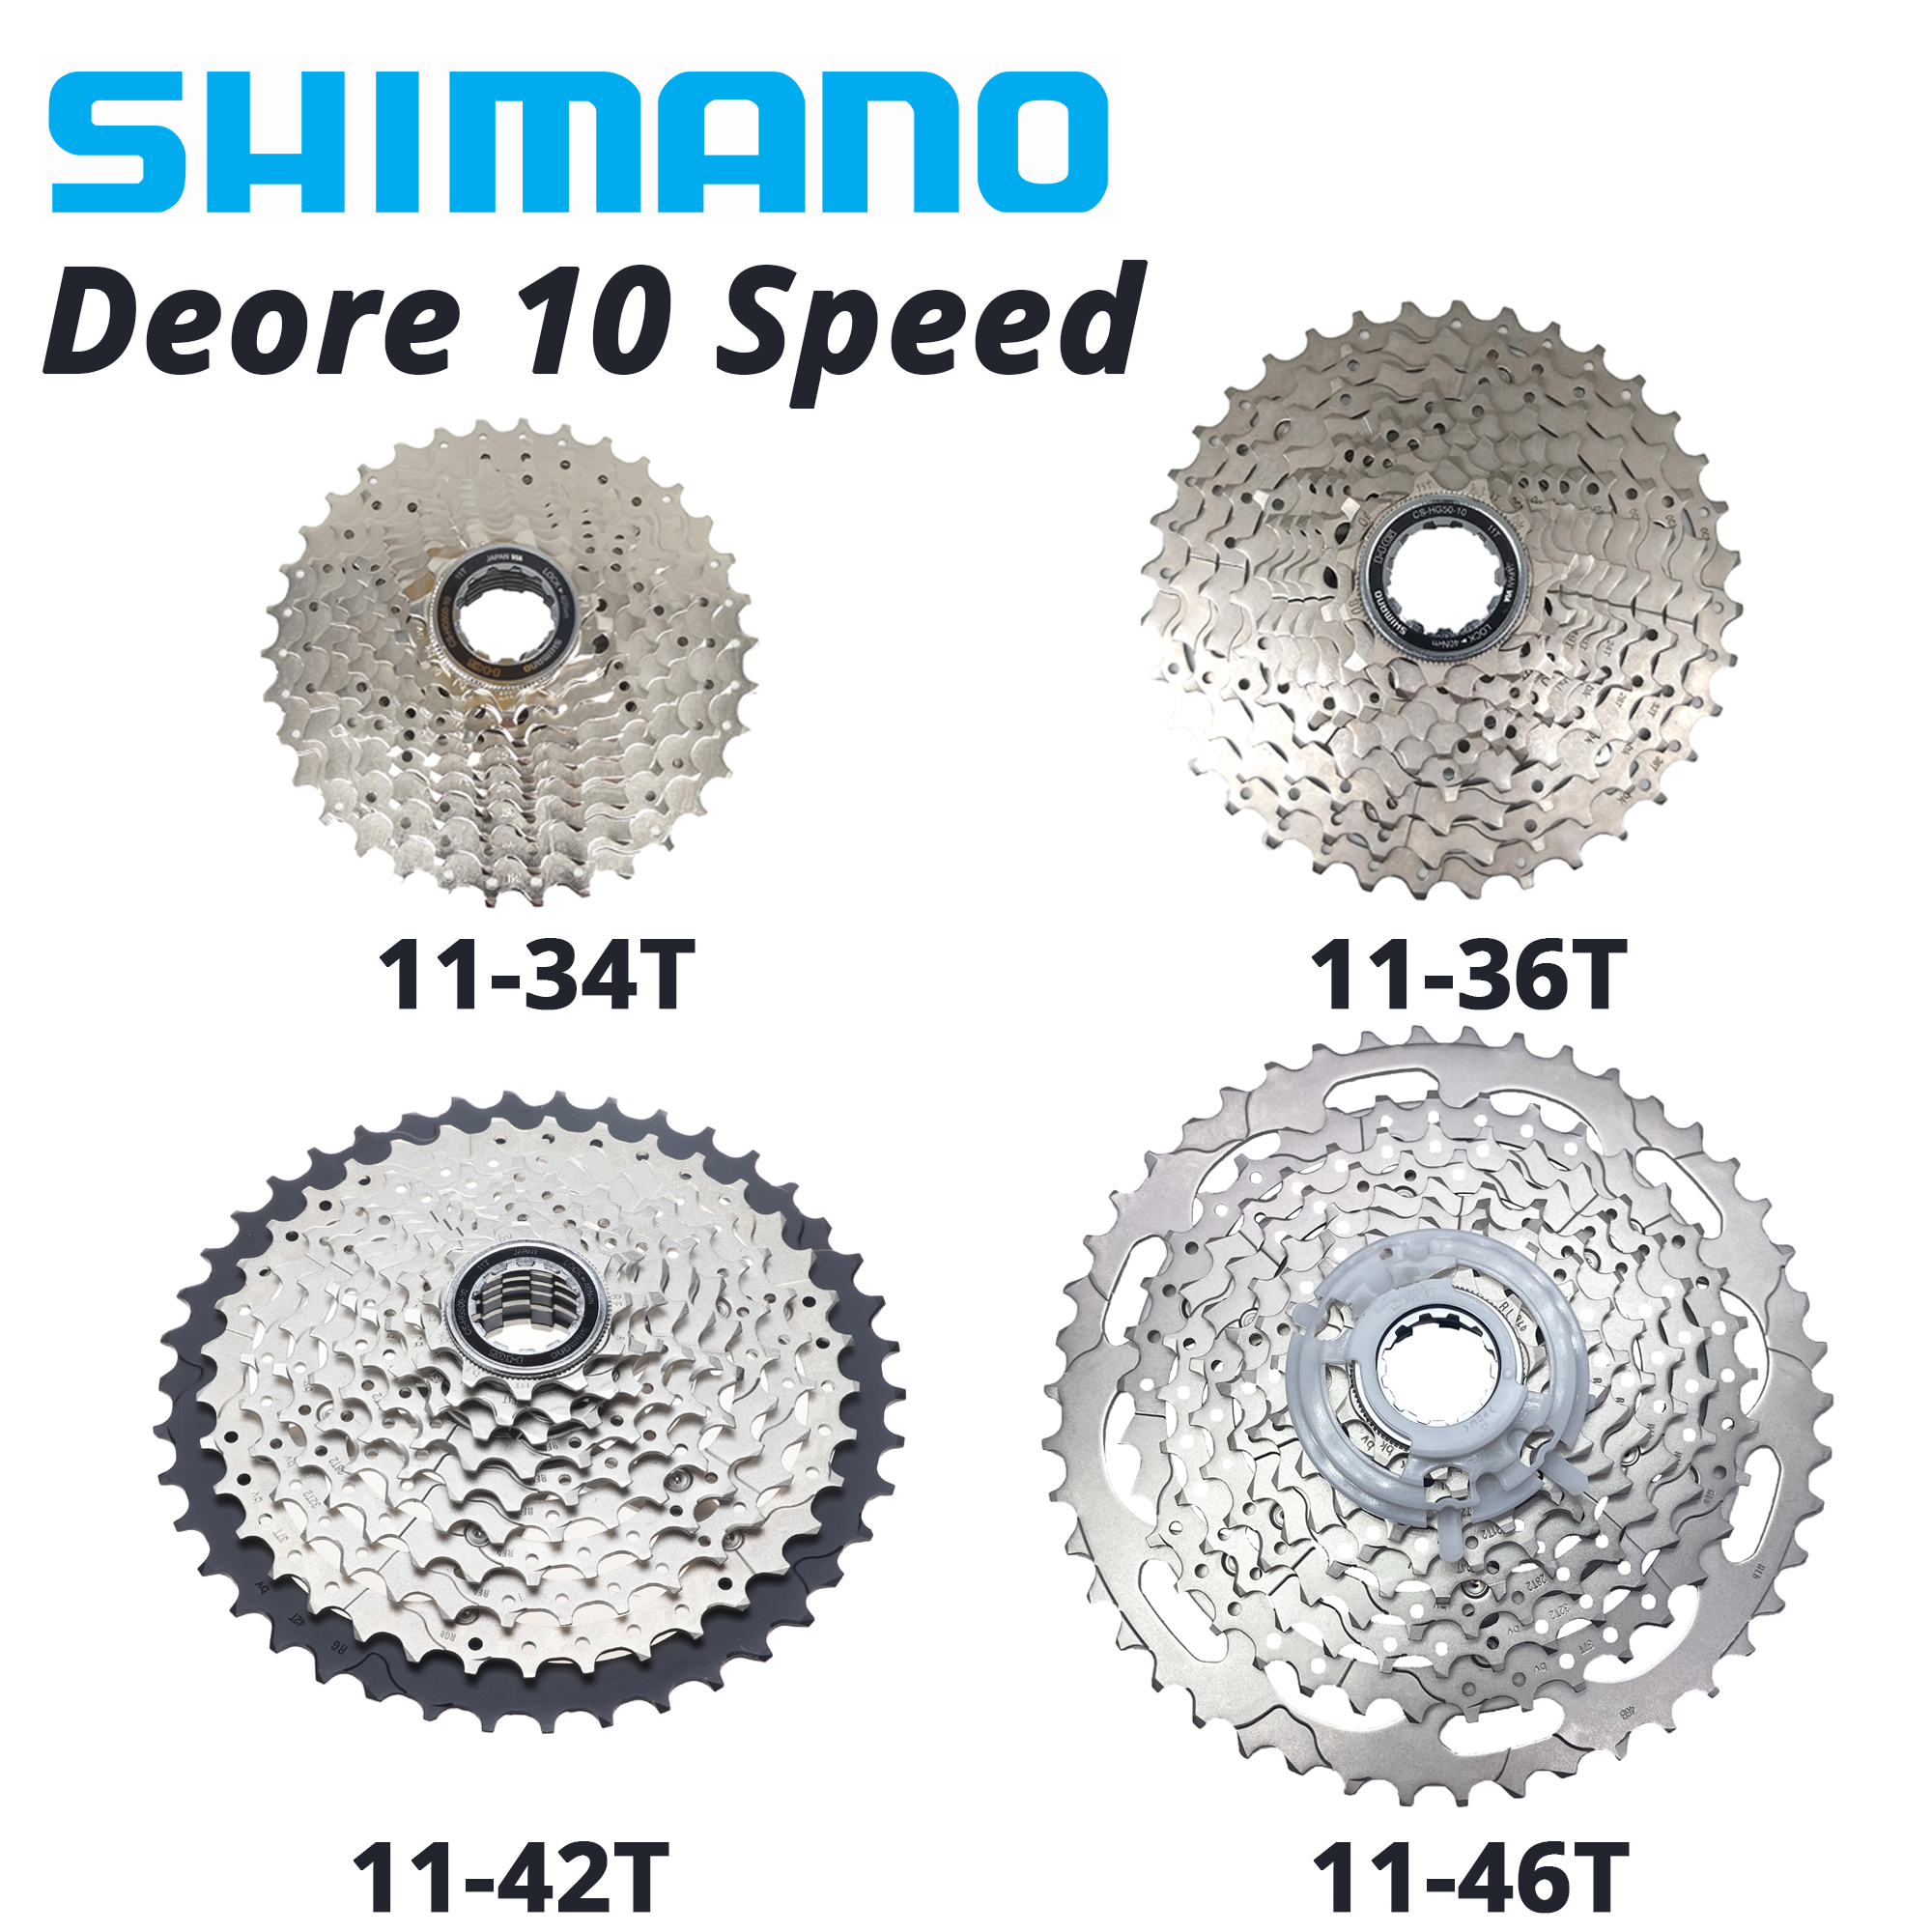 SHIMANO XT M771 10 SPEED---11-34T MTB MOUNTAIN BICYCLE CASSETTE